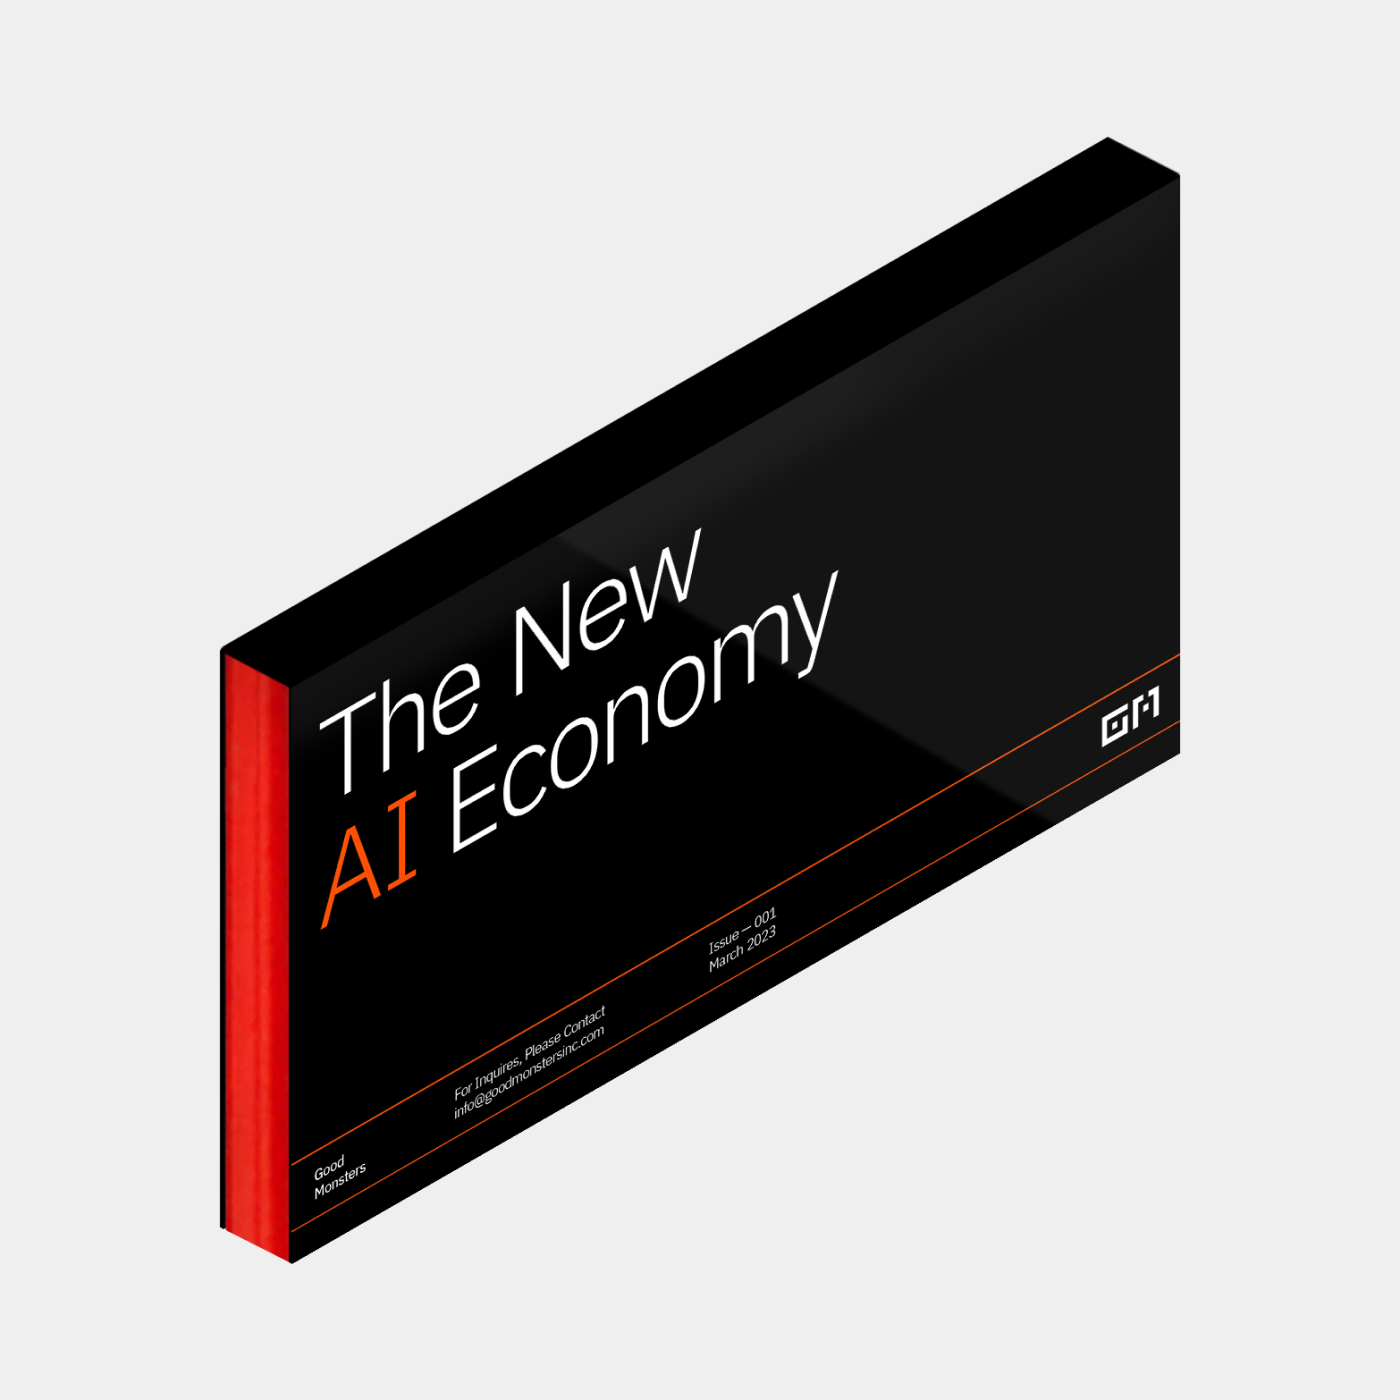 Issue 001: The New AI Economy